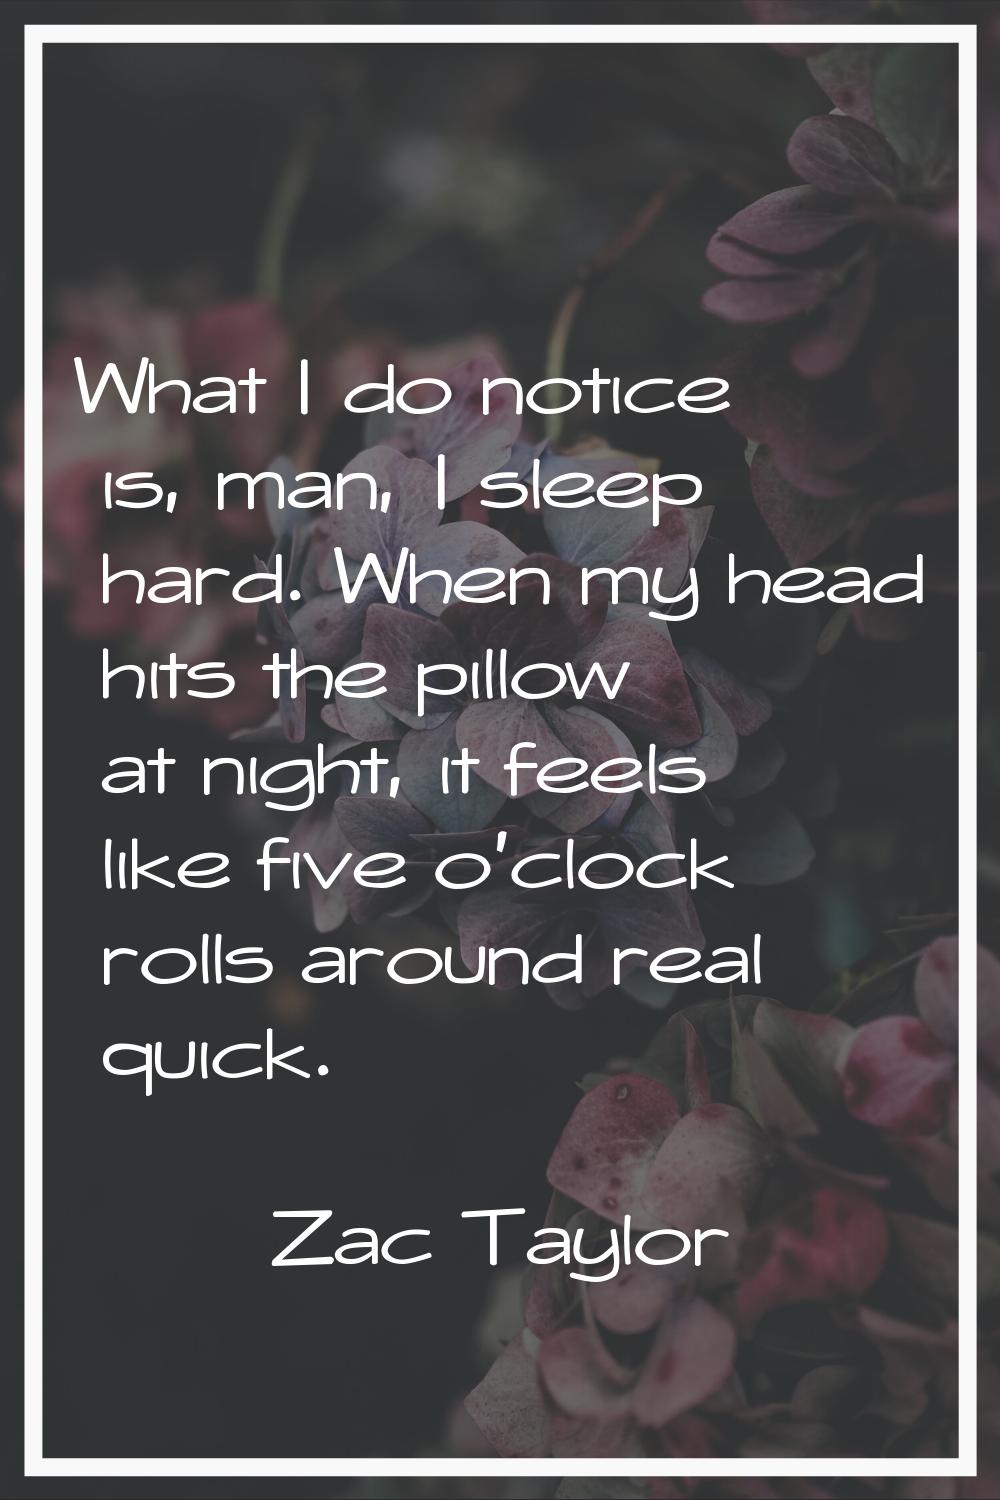 What I do notice is, man, I sleep hard. When my head hits the pillow at night, it feels like five o